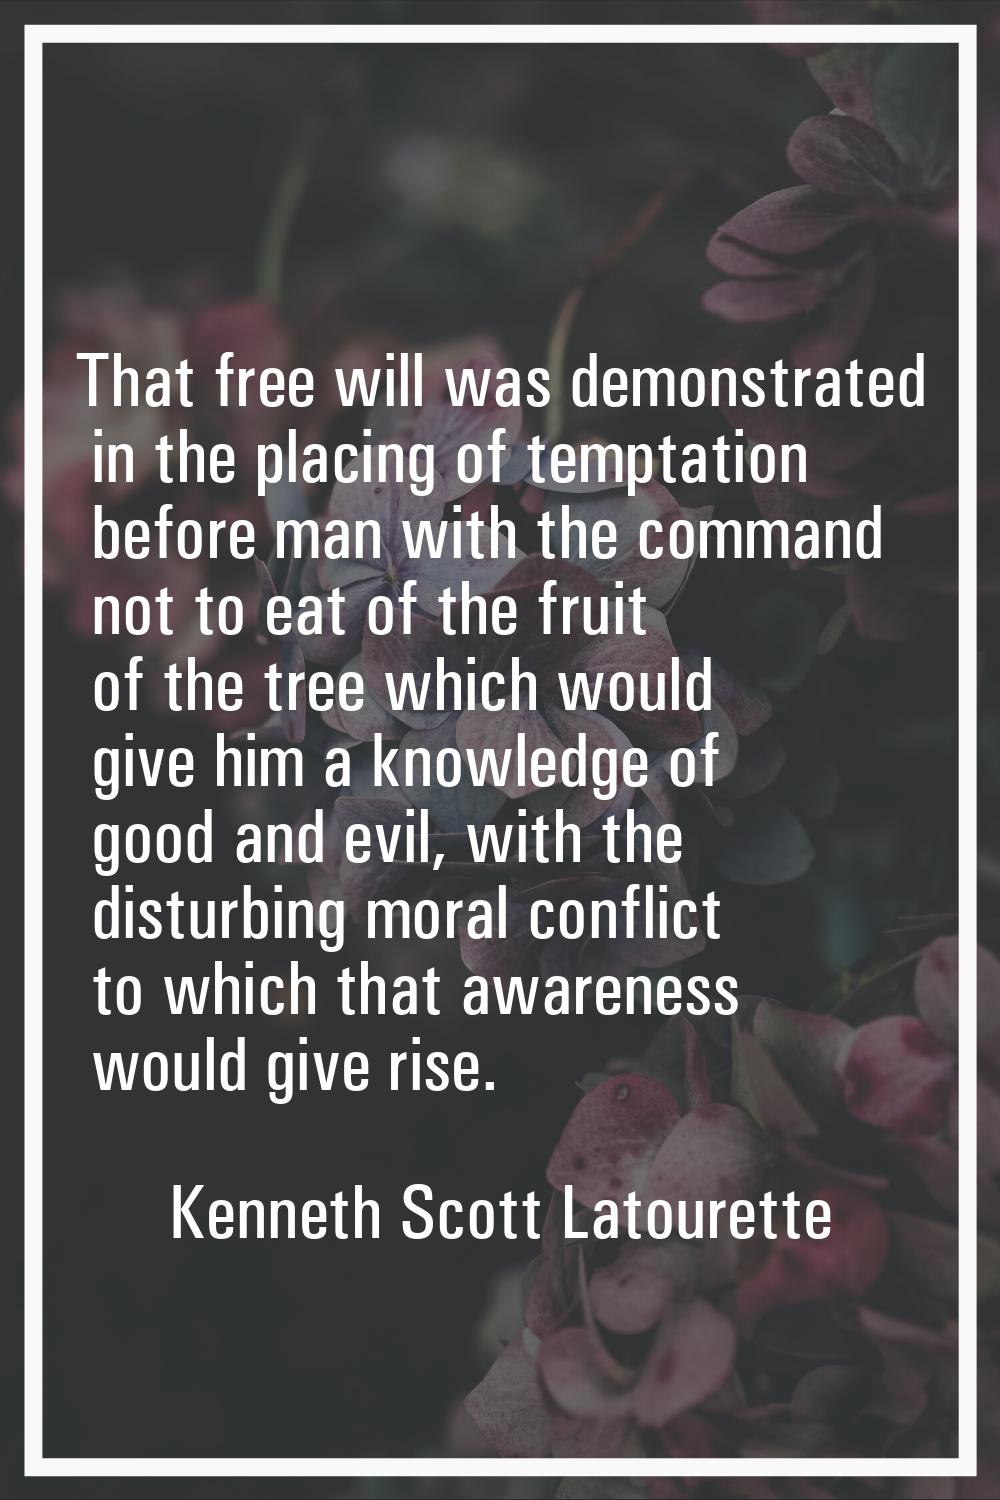 That free will was demonstrated in the placing of temptation before man with the command not to eat